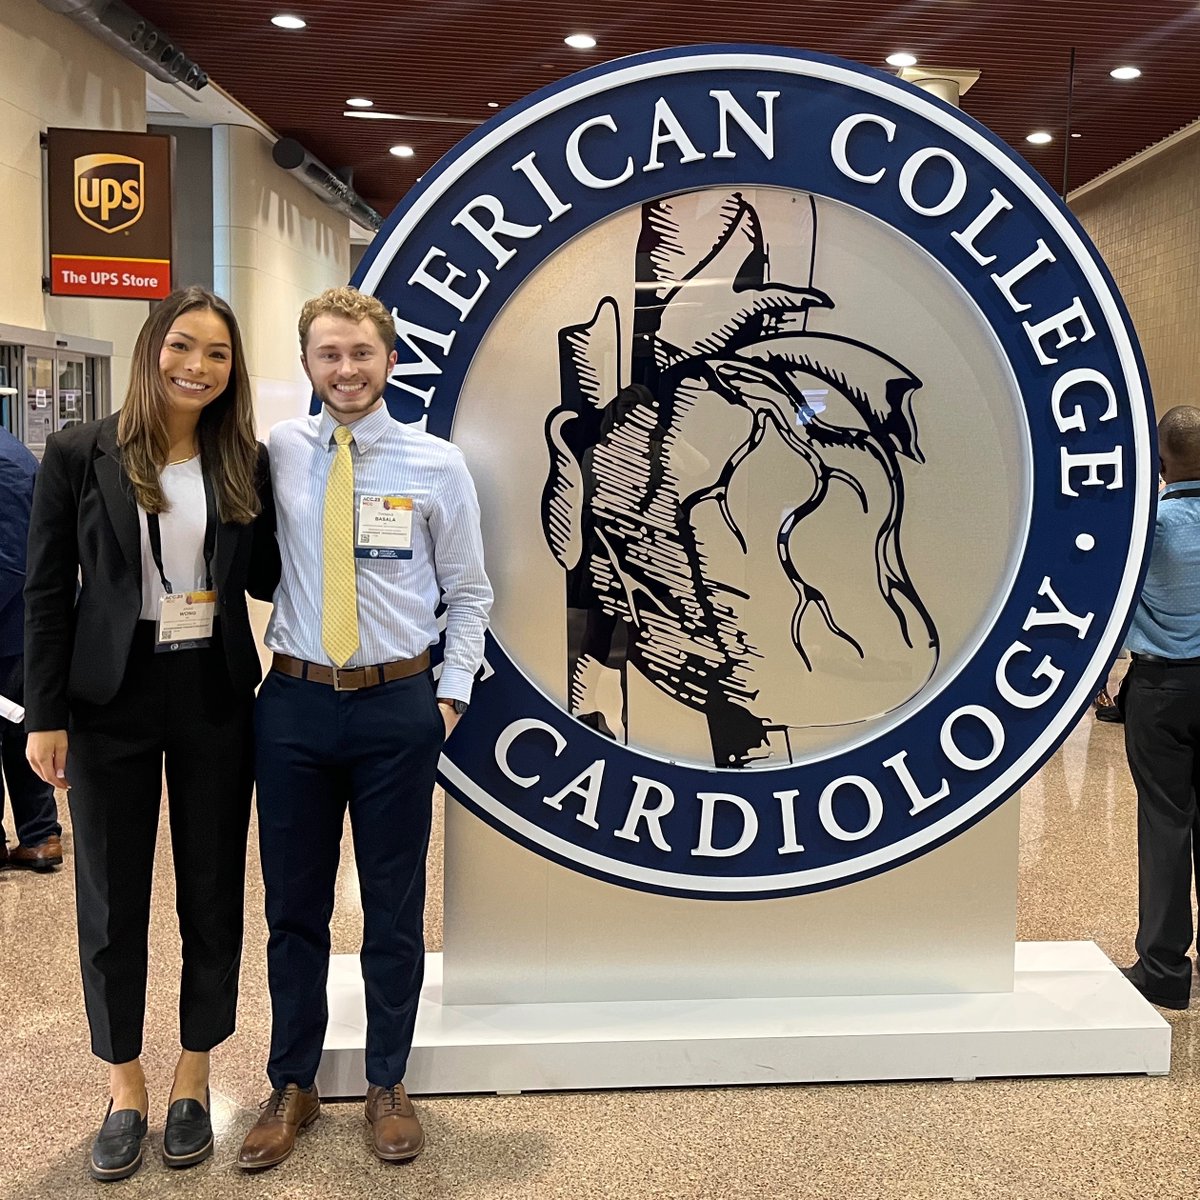 I had the amazing opportunity to present the results from my @MHIF_Heart intern project at #ACC23. Congrats to all who shared their work, especially the Triluminate investigators (@psorajja + others) for sharing late-breaking data on transcatheter tricuspid repair!